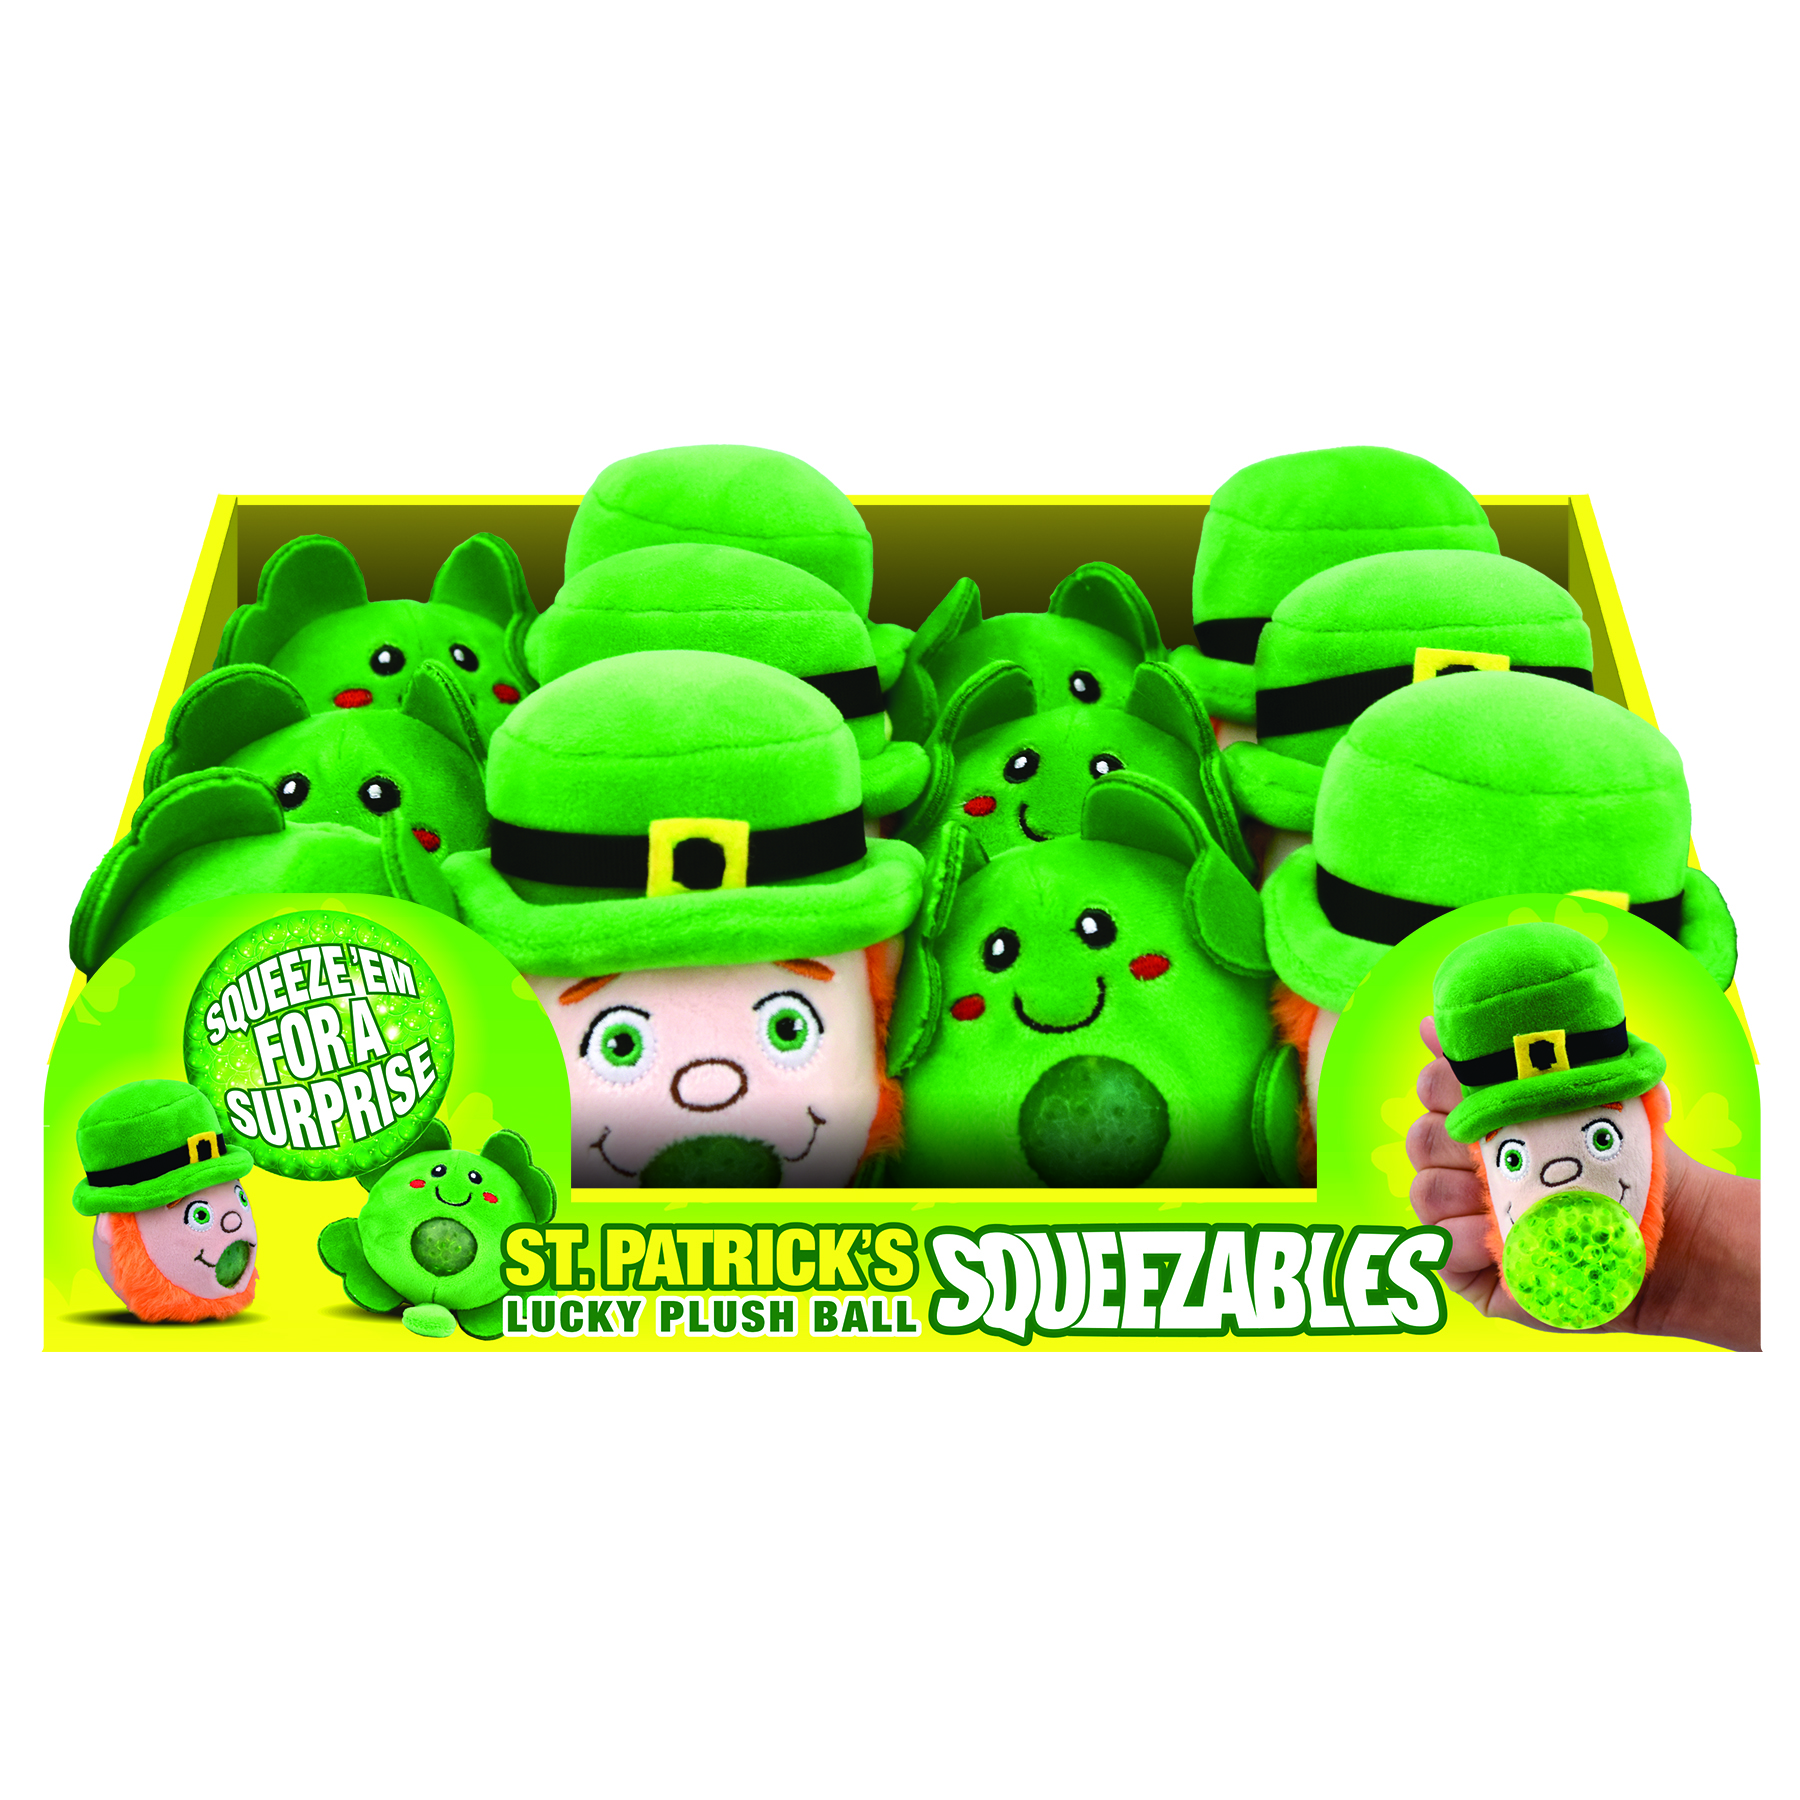 St. Patrick's Day Squeezables